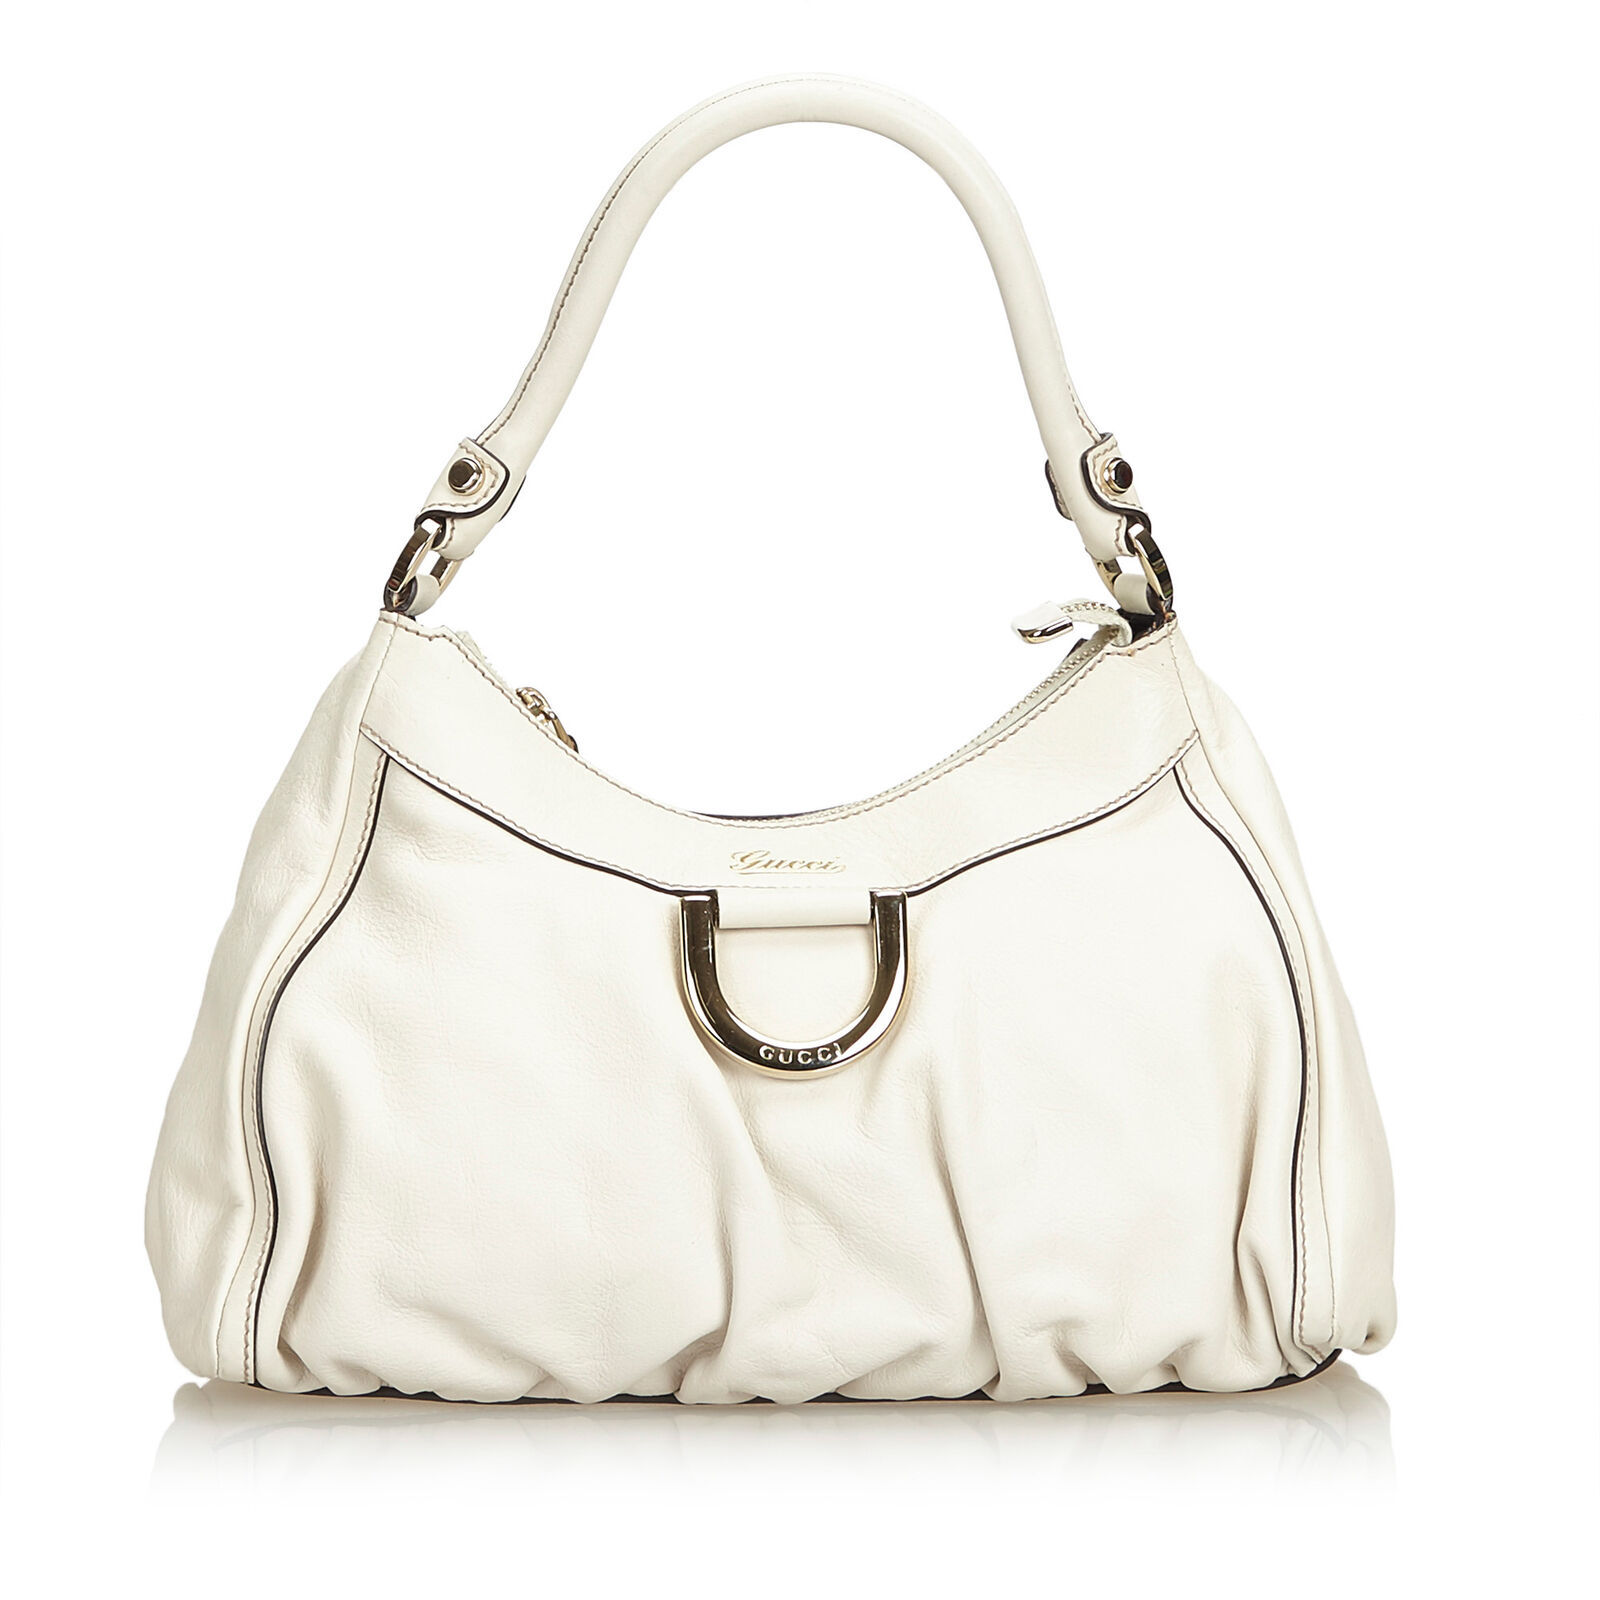 Authentic Gucci White Leather Abbey D-Ring Handbag Italy - $447.87